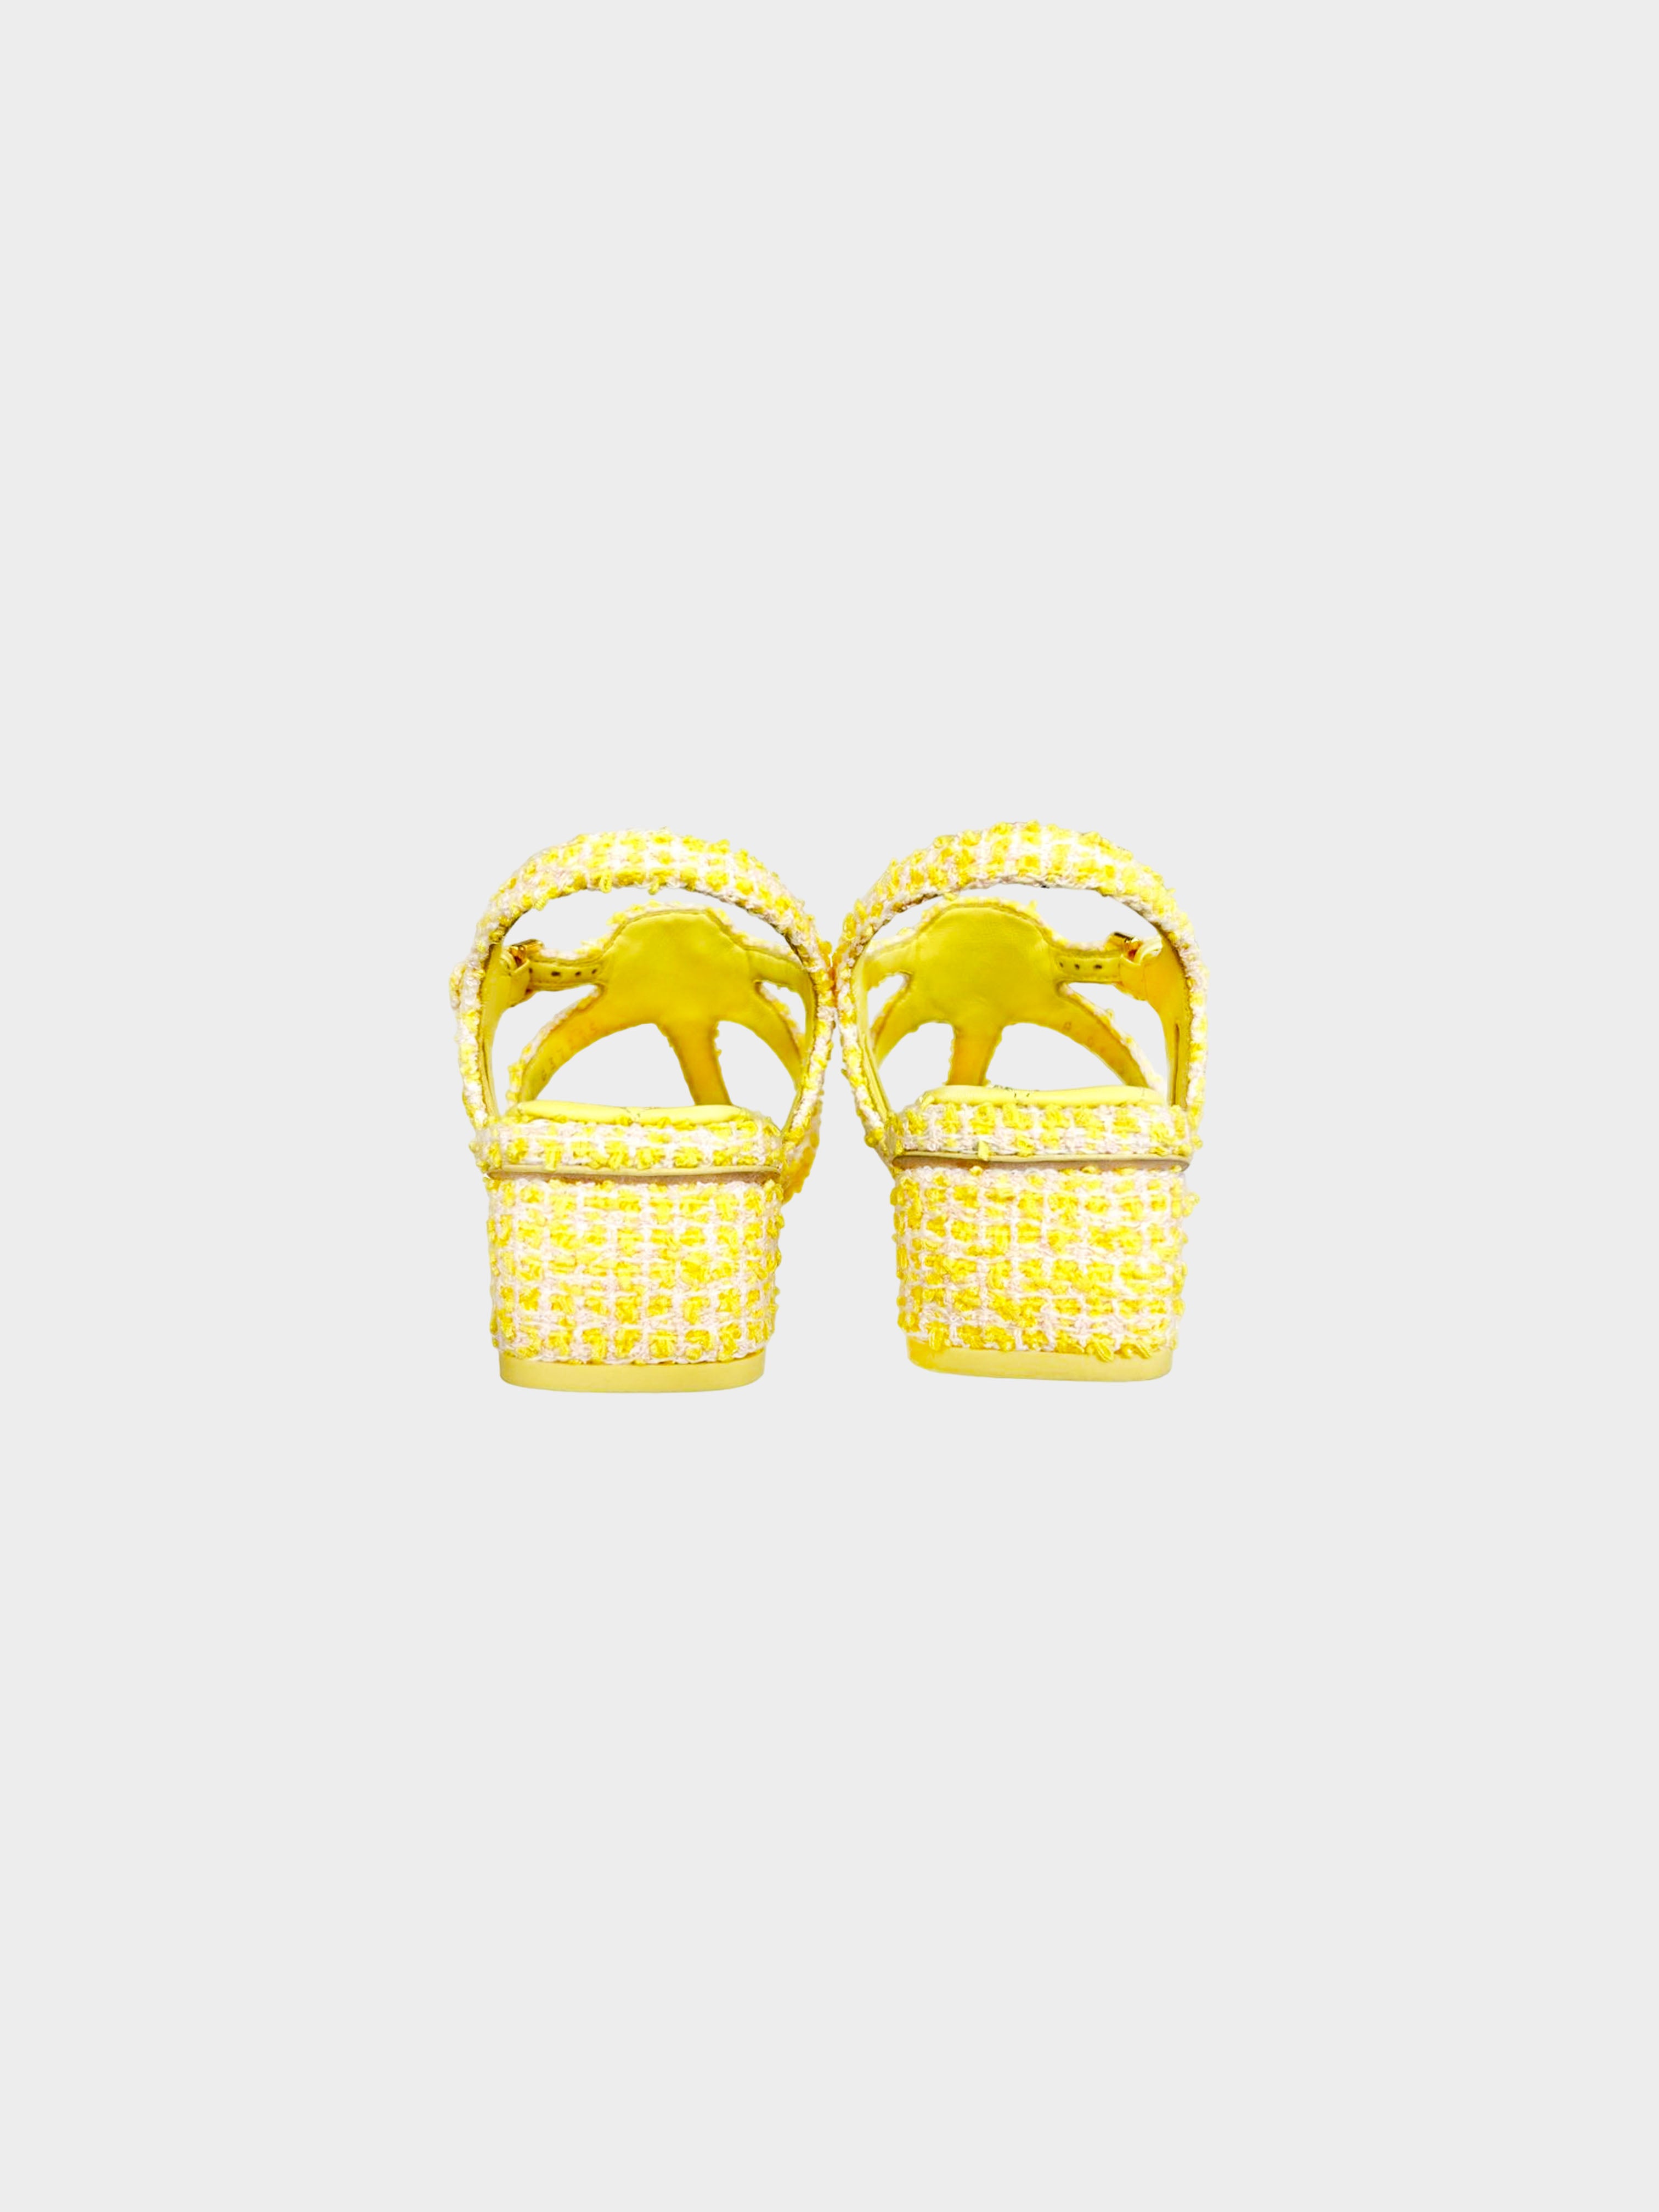 Chanel SS 2021 Yellow Tweed Sandals